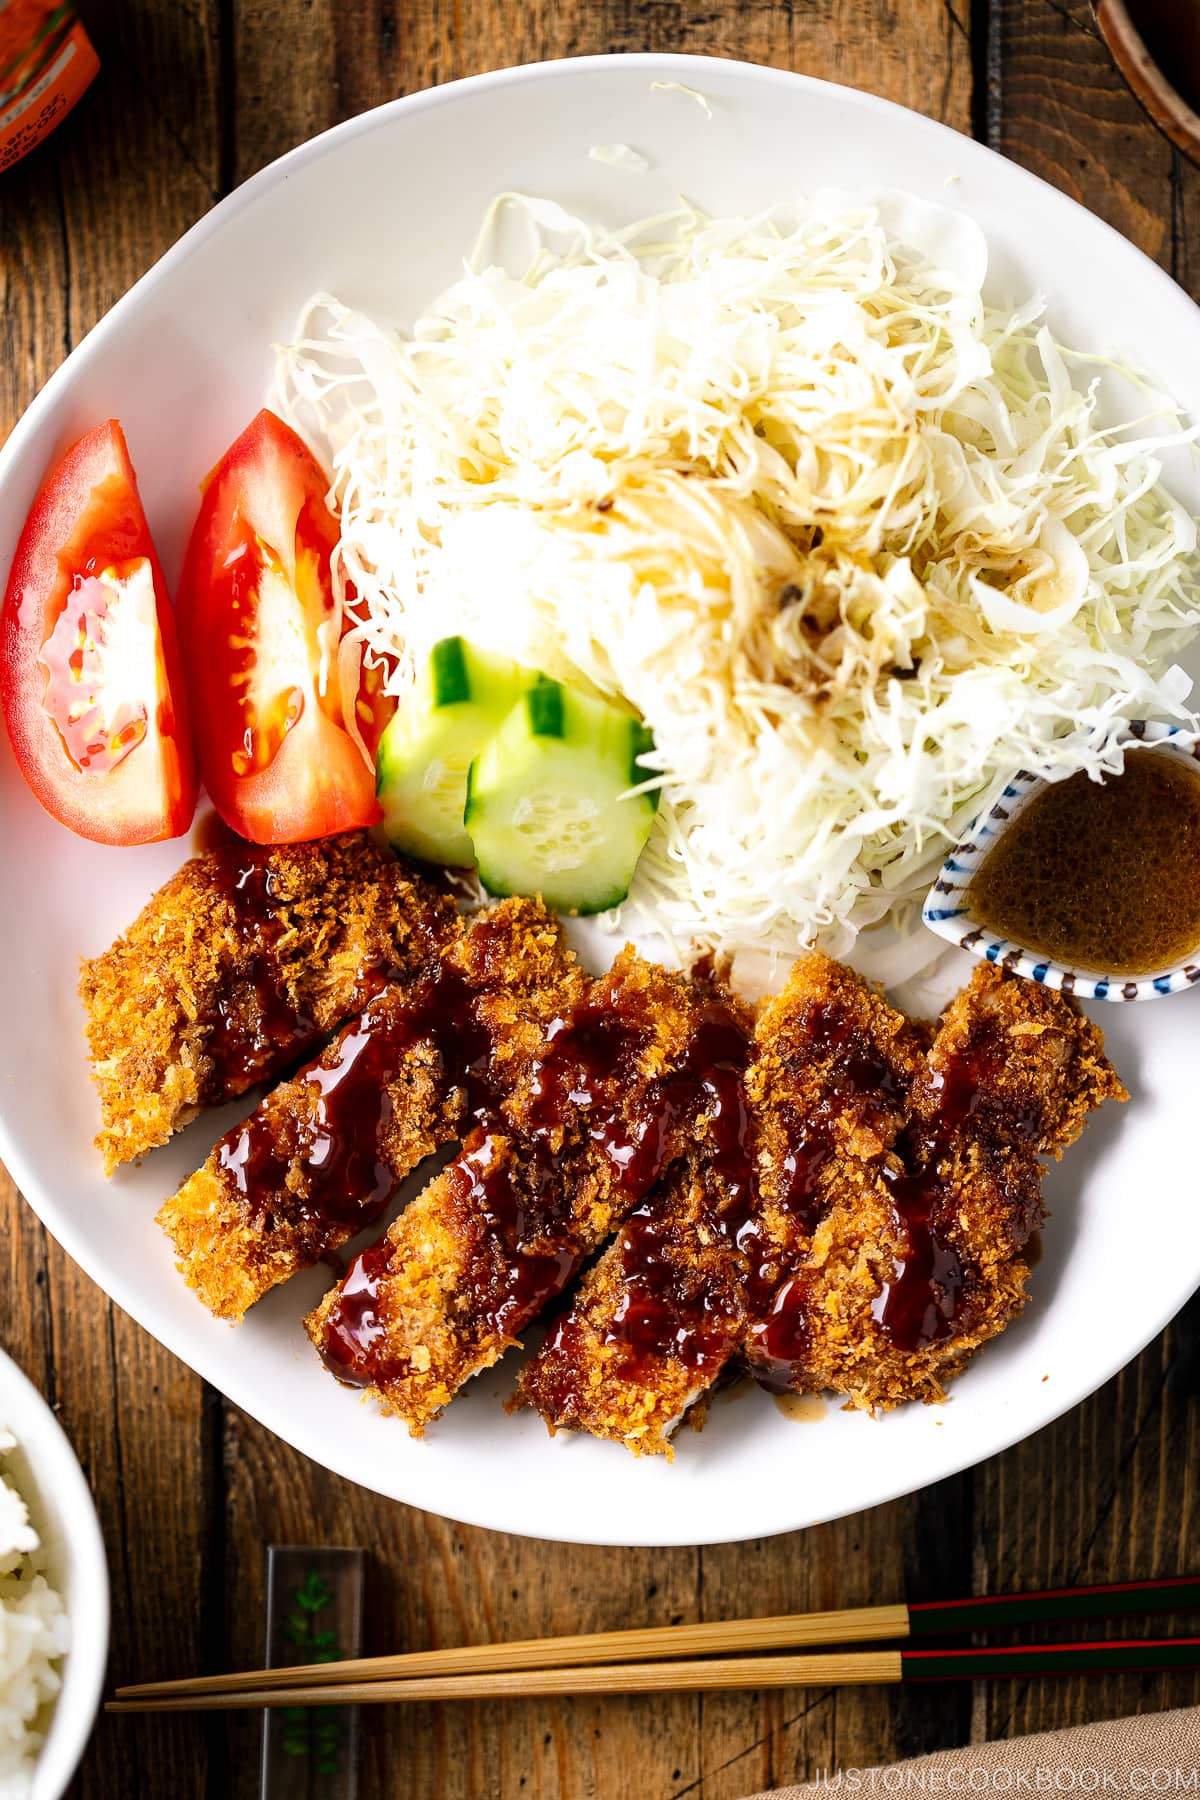 A white plate containing Baked Chicken Katsu (Japanese Chicken Cutlets), shredded cabbage salad, and tomato slices.